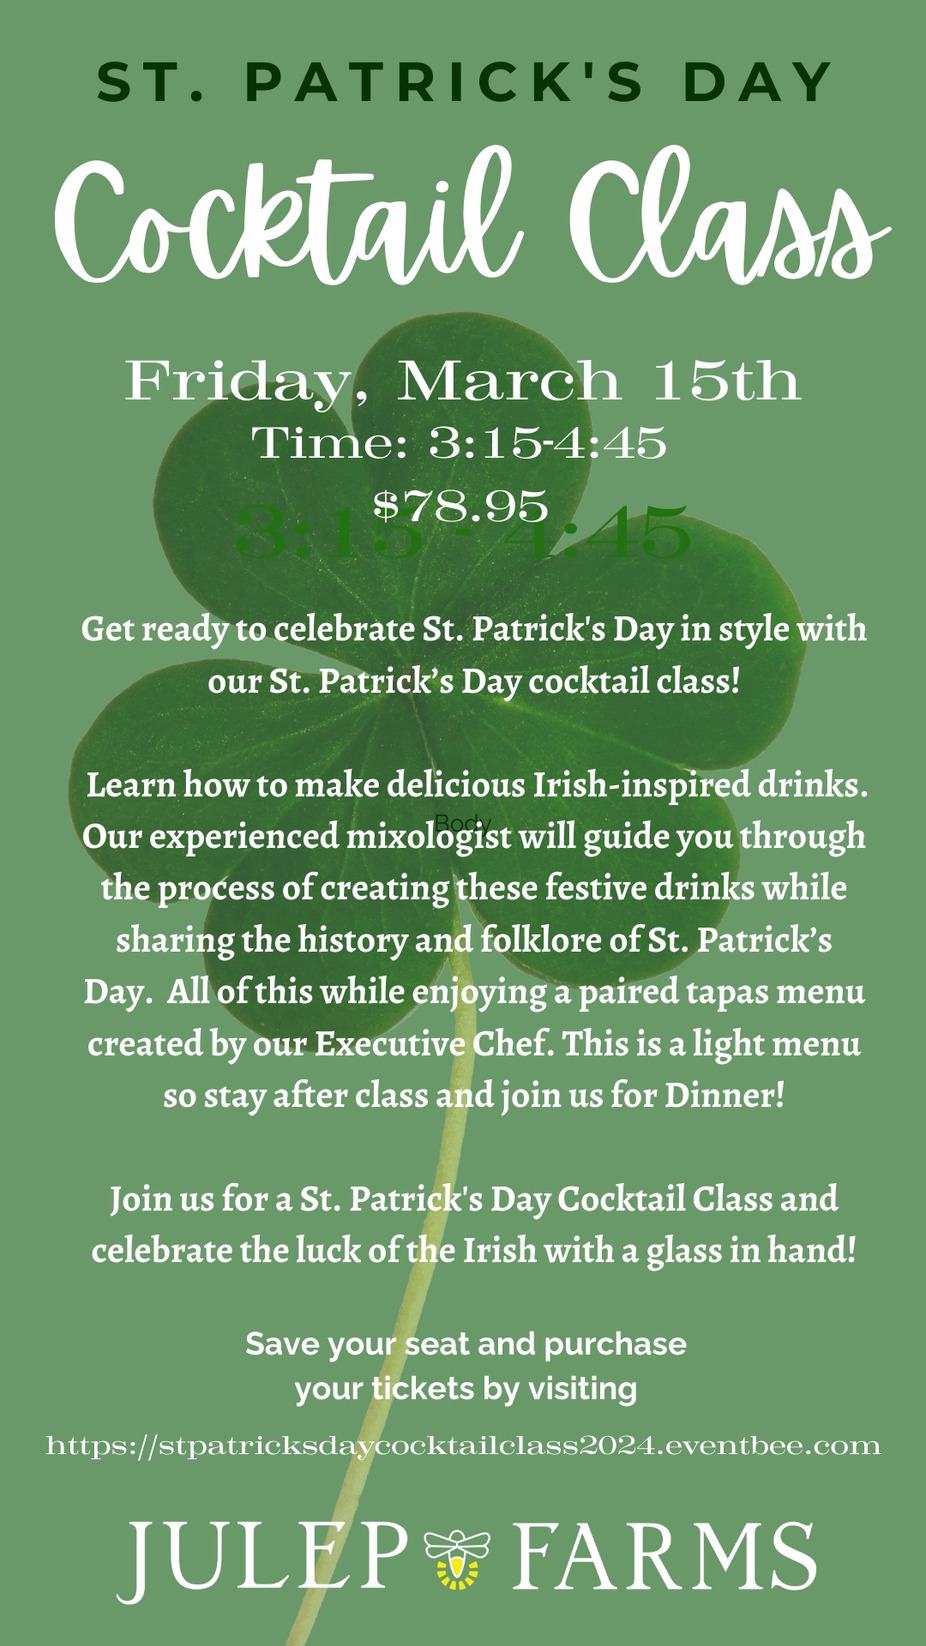 St. Patrick's Day Cocktail Class event photo